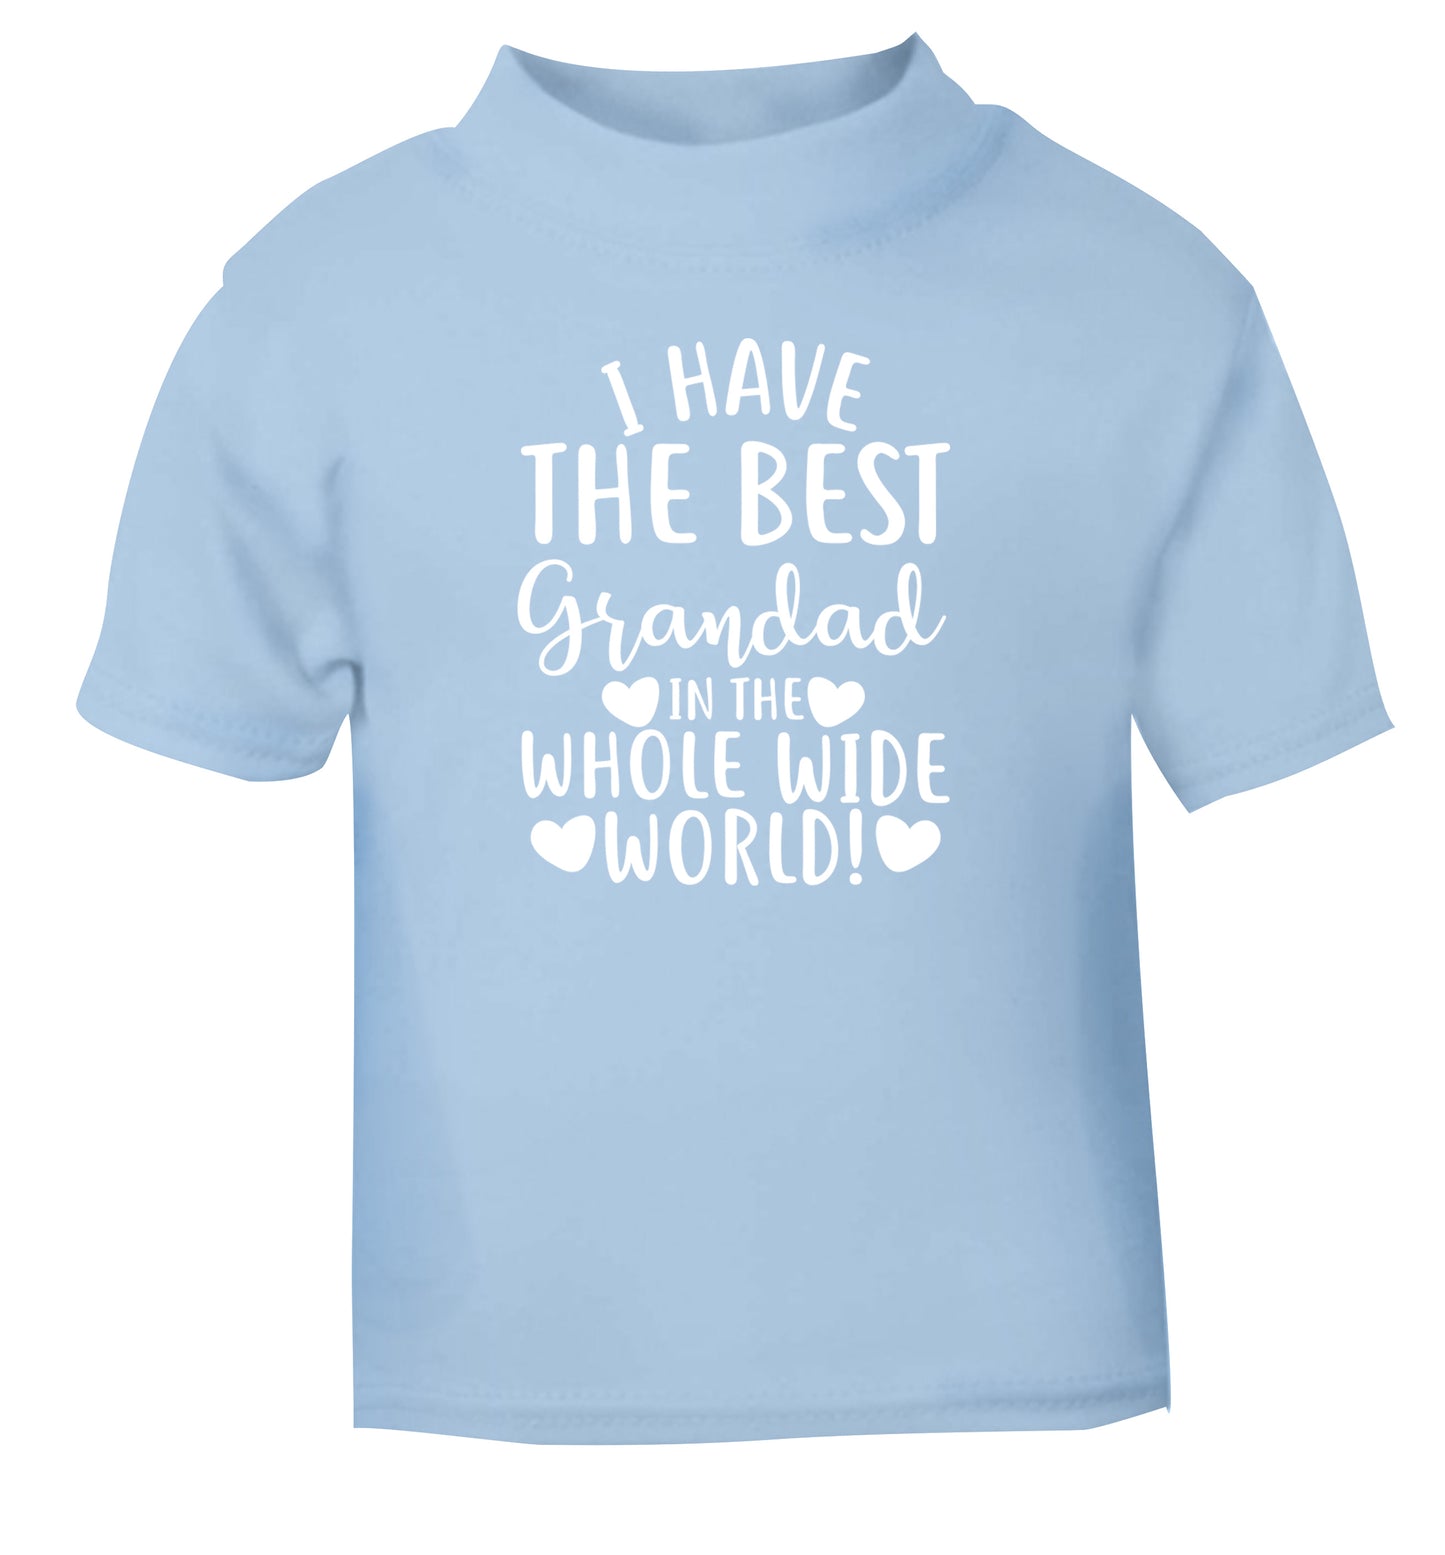 I have the best grandad in the whole wide world! light blue Baby Toddler Tshirt 2 Years